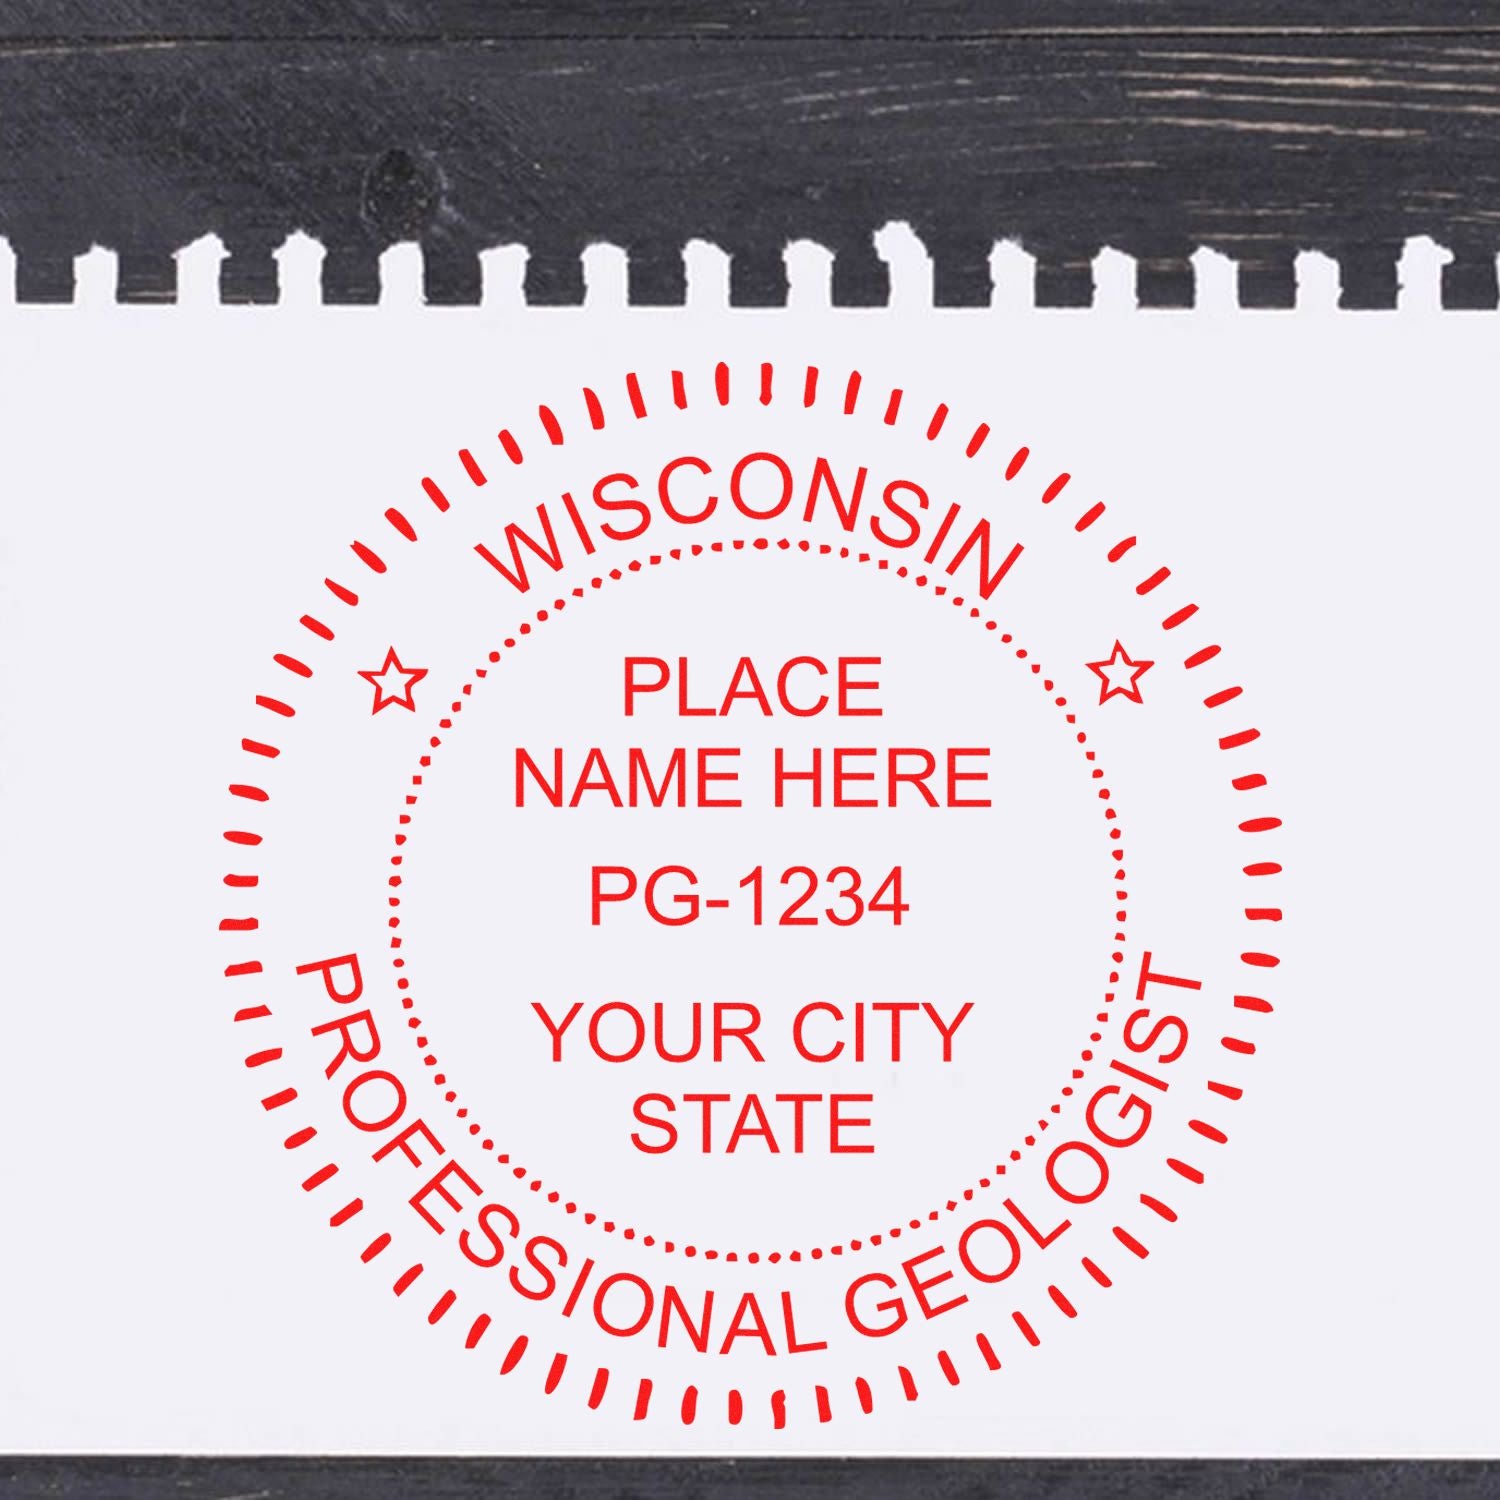 The Premium MaxLight Pre-Inked Wisconsin Geology Stamp stamp impression comes to life with a crisp, detailed image stamped on paper - showcasing true professional quality.